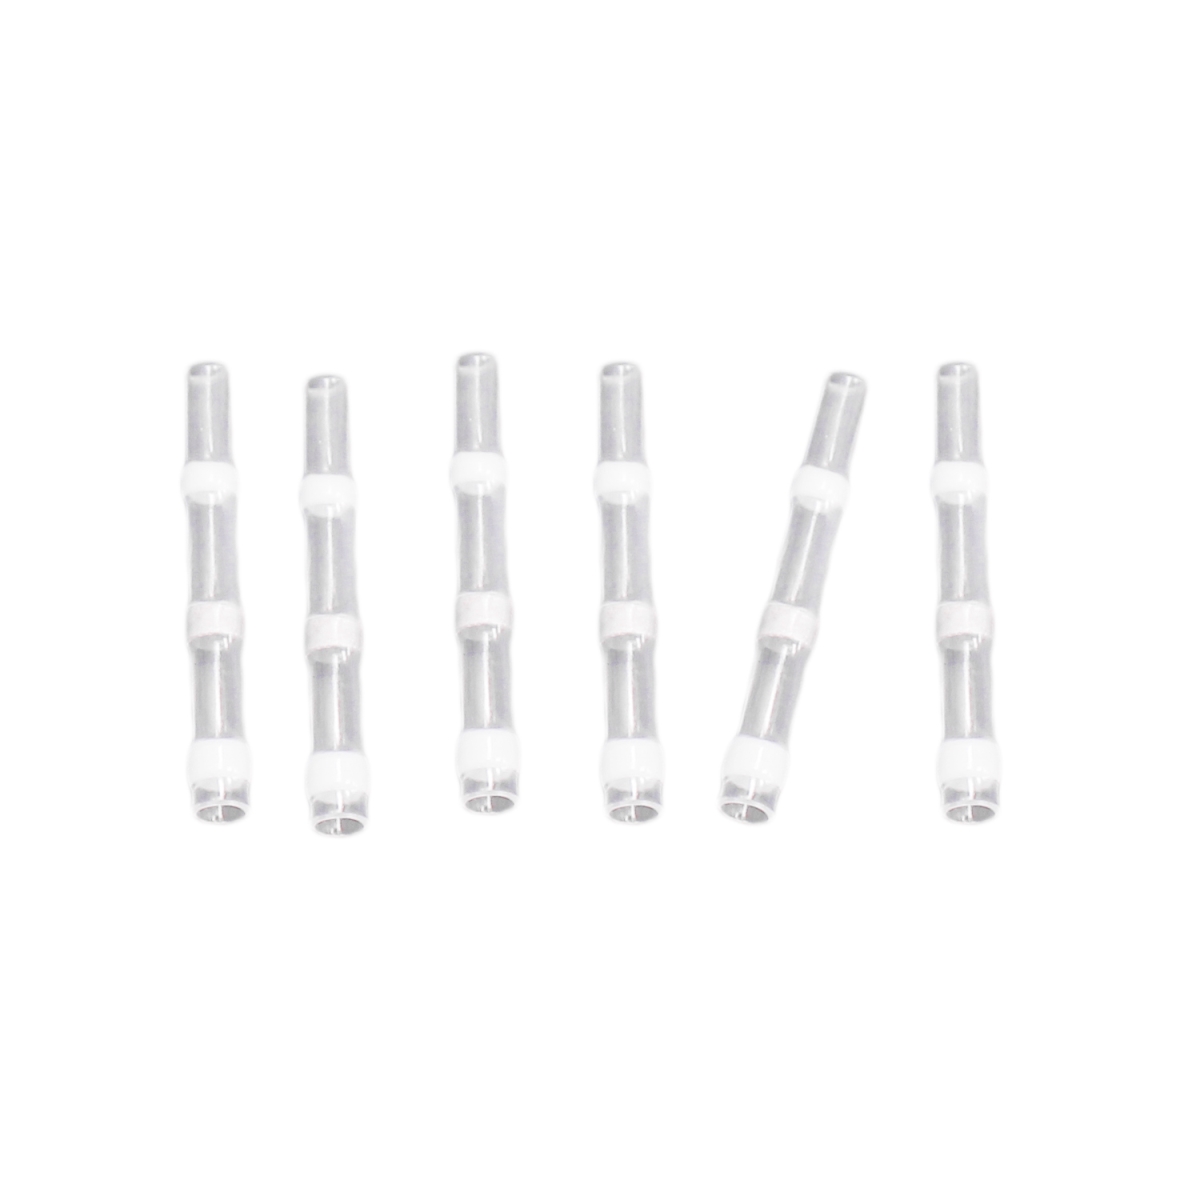 Picture of Racers Edge RCE1670 Quick-Repair Solder Tubes for 24-26 AWG Wire - Pack of 6